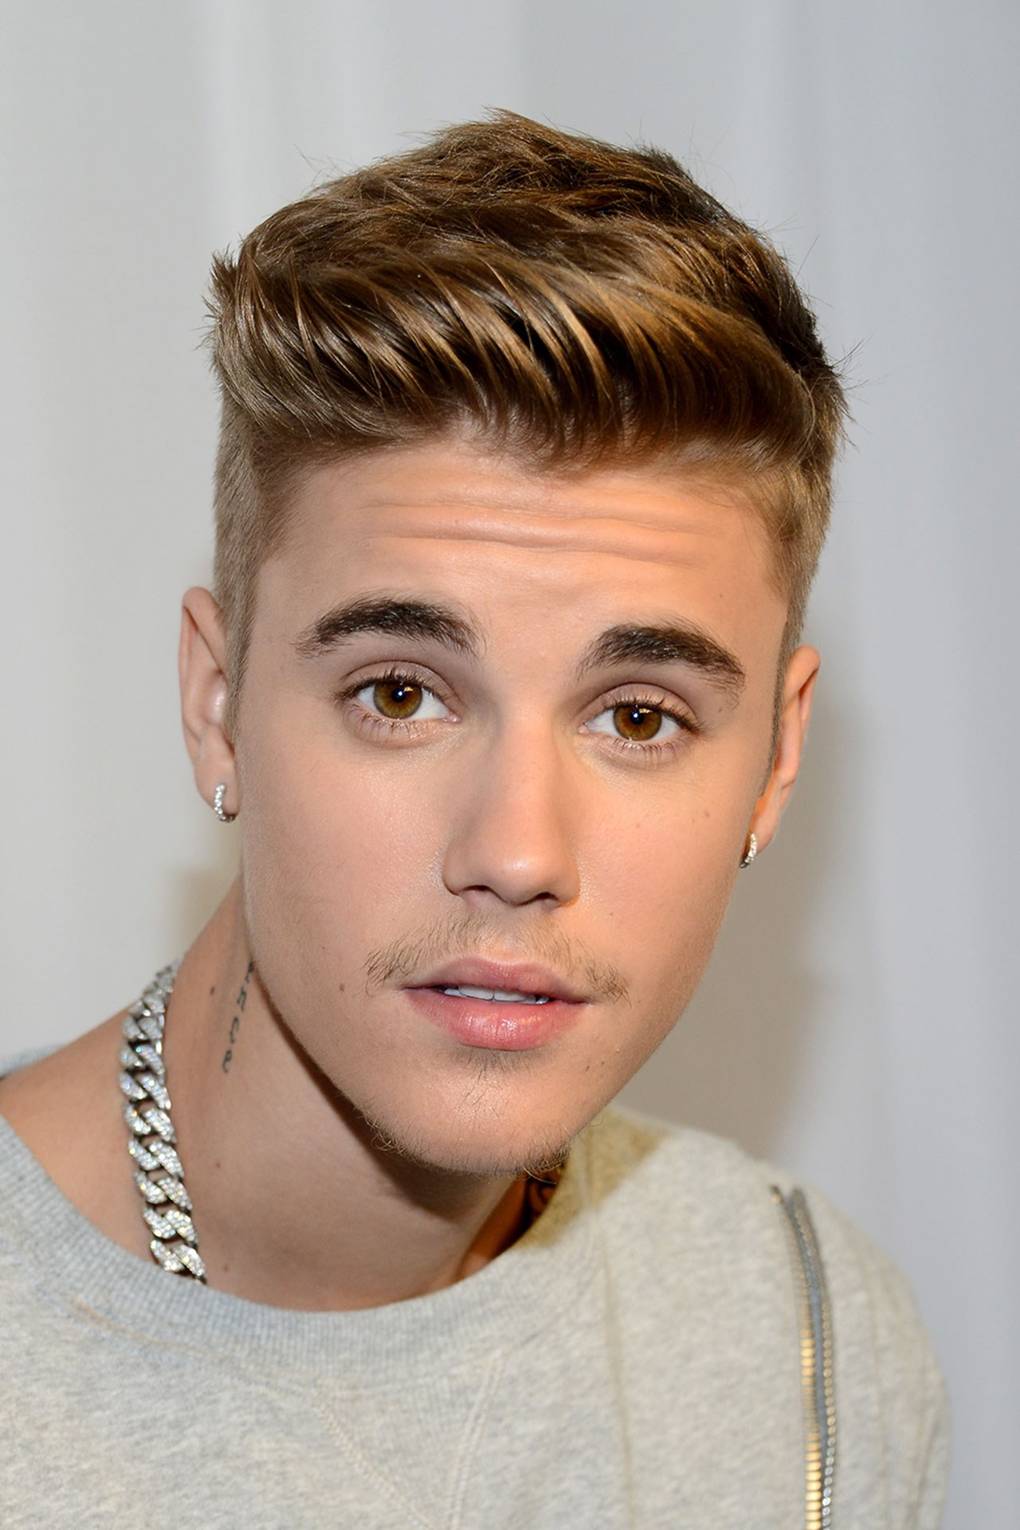 Justin Biebers Best Hairstyles Hair Styles Over The Years